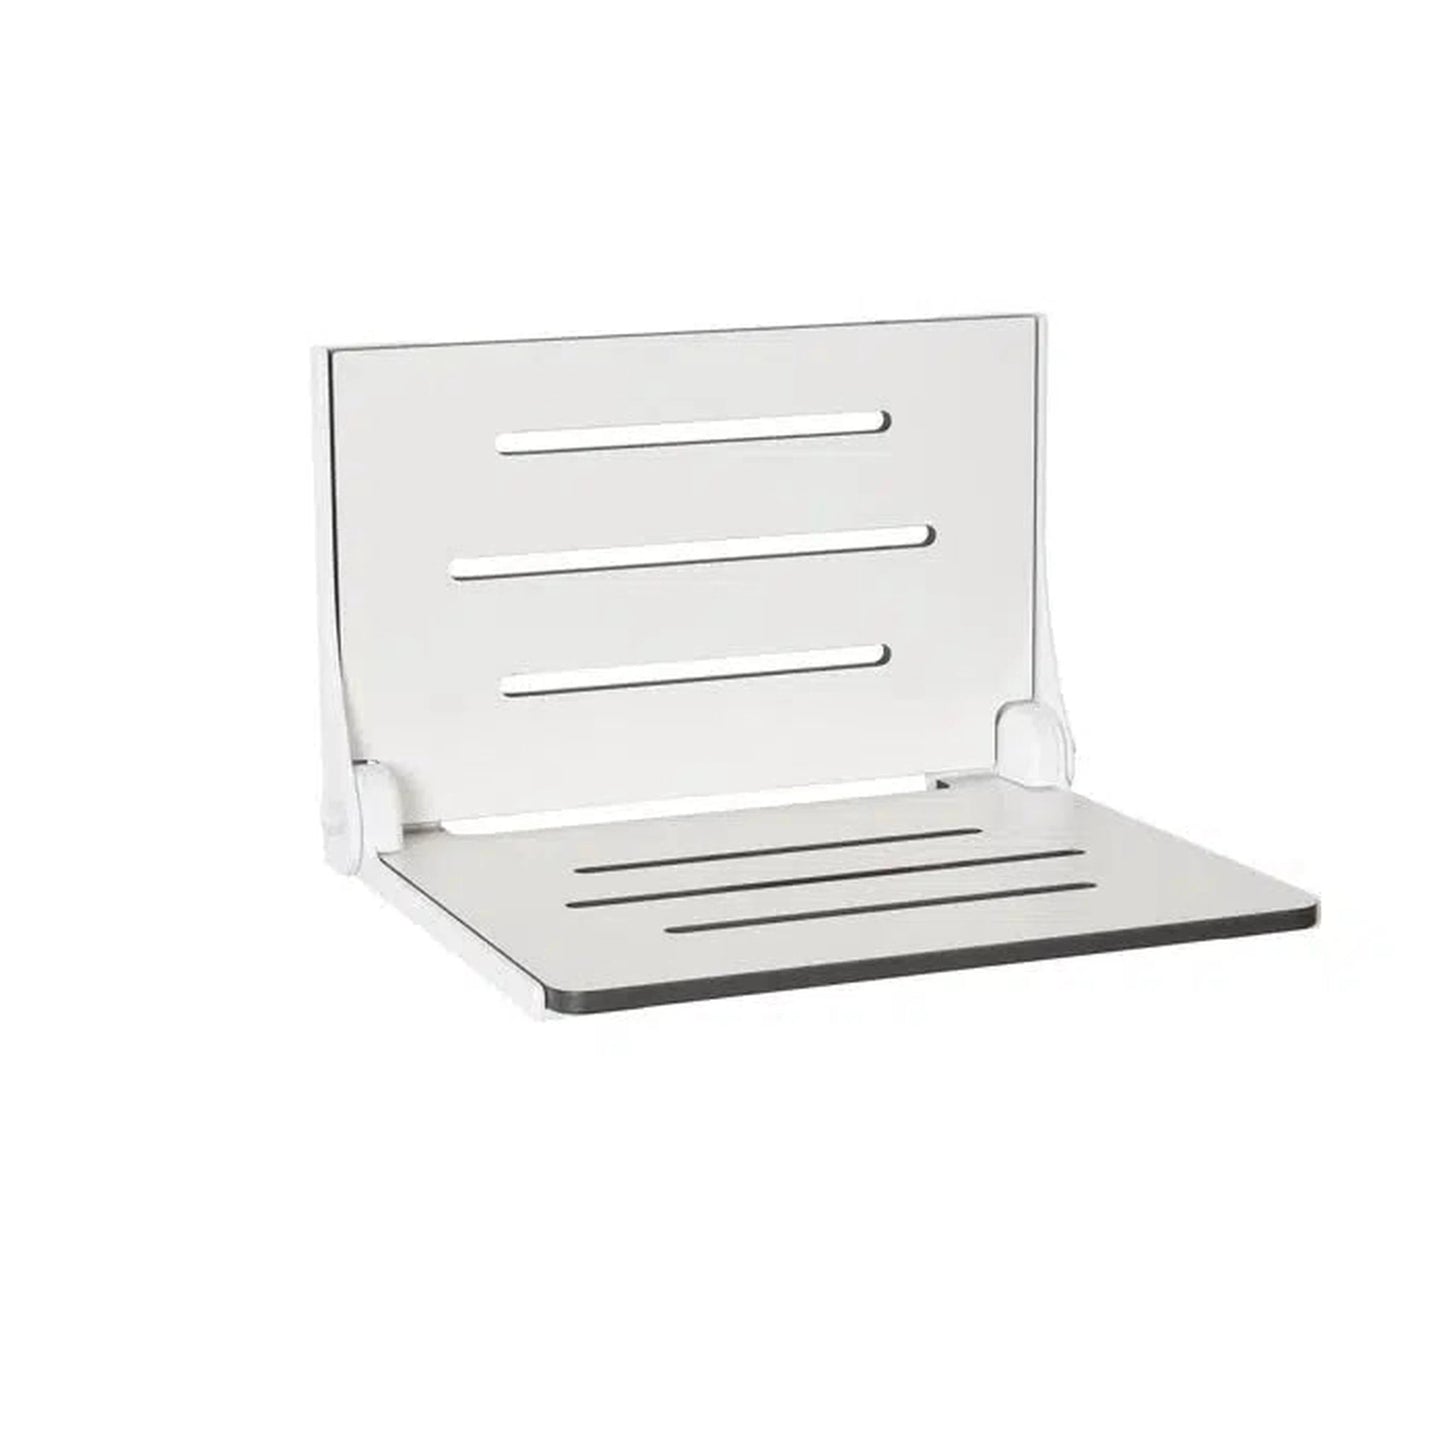 Seachrome Silhouette 19" Phenolic White Seat Top and White Frame Wall Mounted High Back Shower Seat